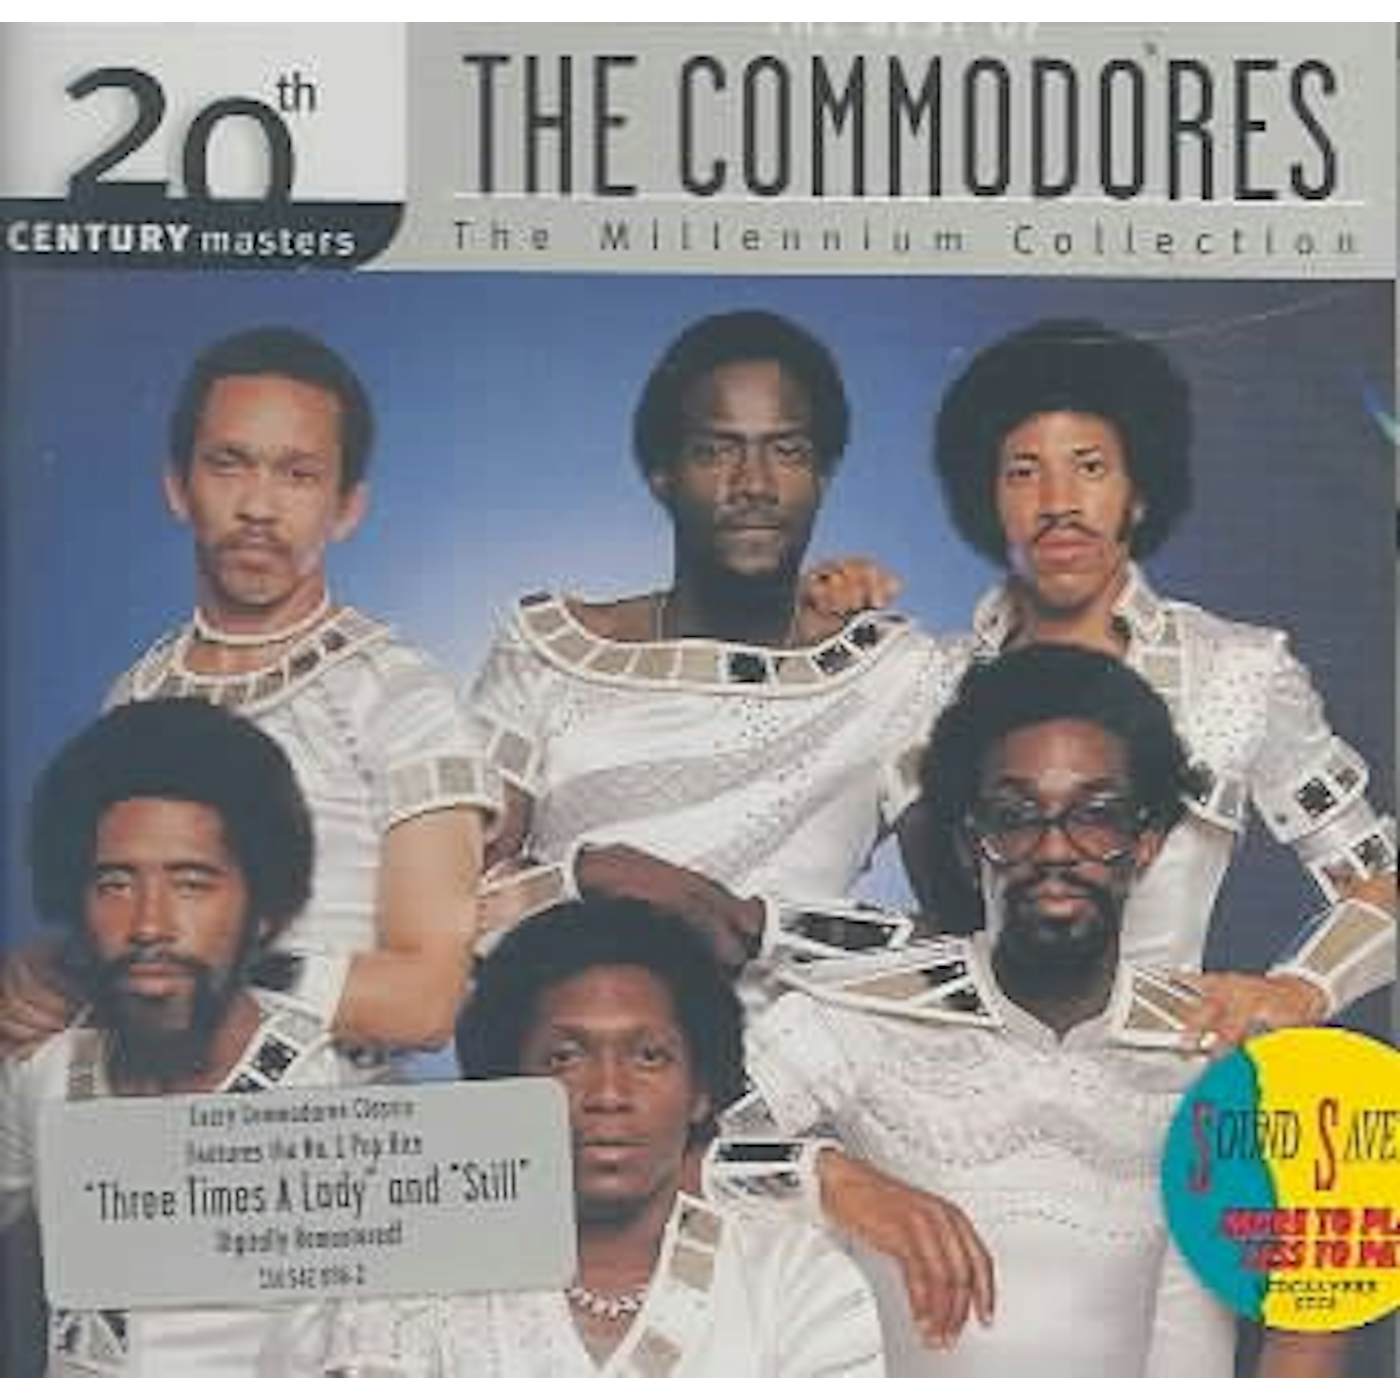 Commodores MILLENNIUM COLLECTION: 20TH CENTURY MASTERS CD